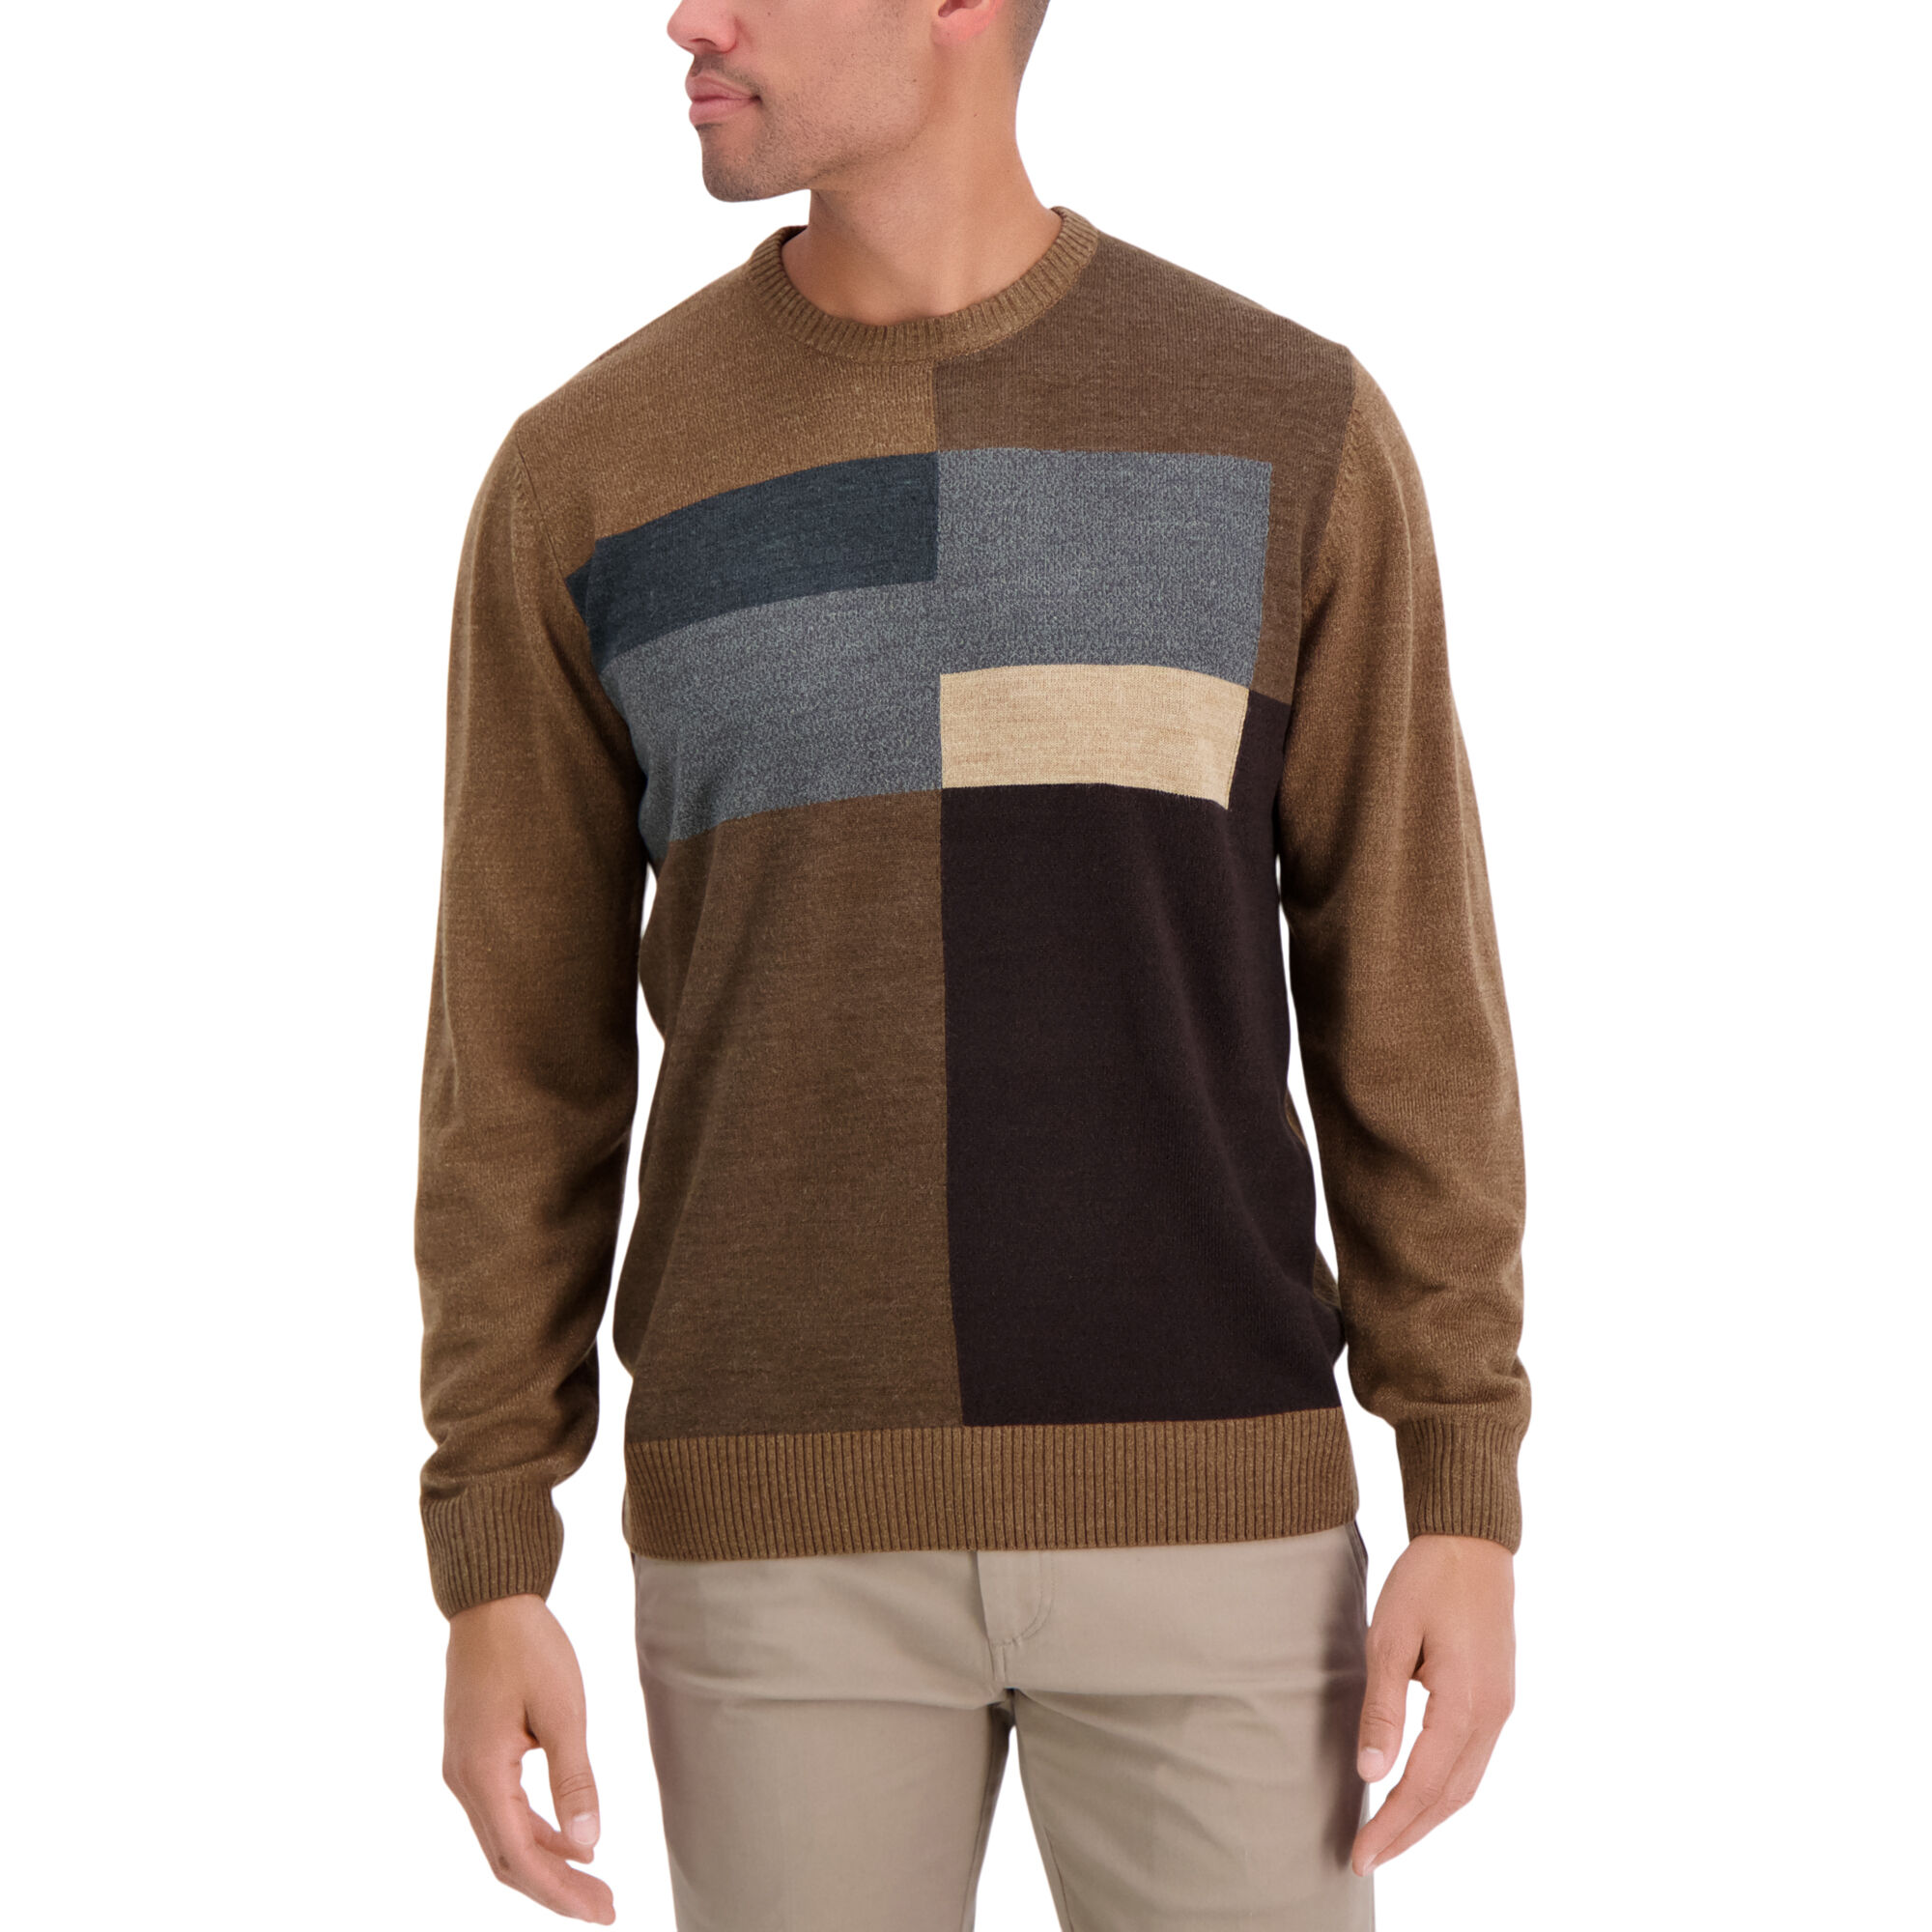 Haggar Soft Acrylic Patchwork Sweater Bark (HGHF0S6096 Clothing Shirts & Tops) photo